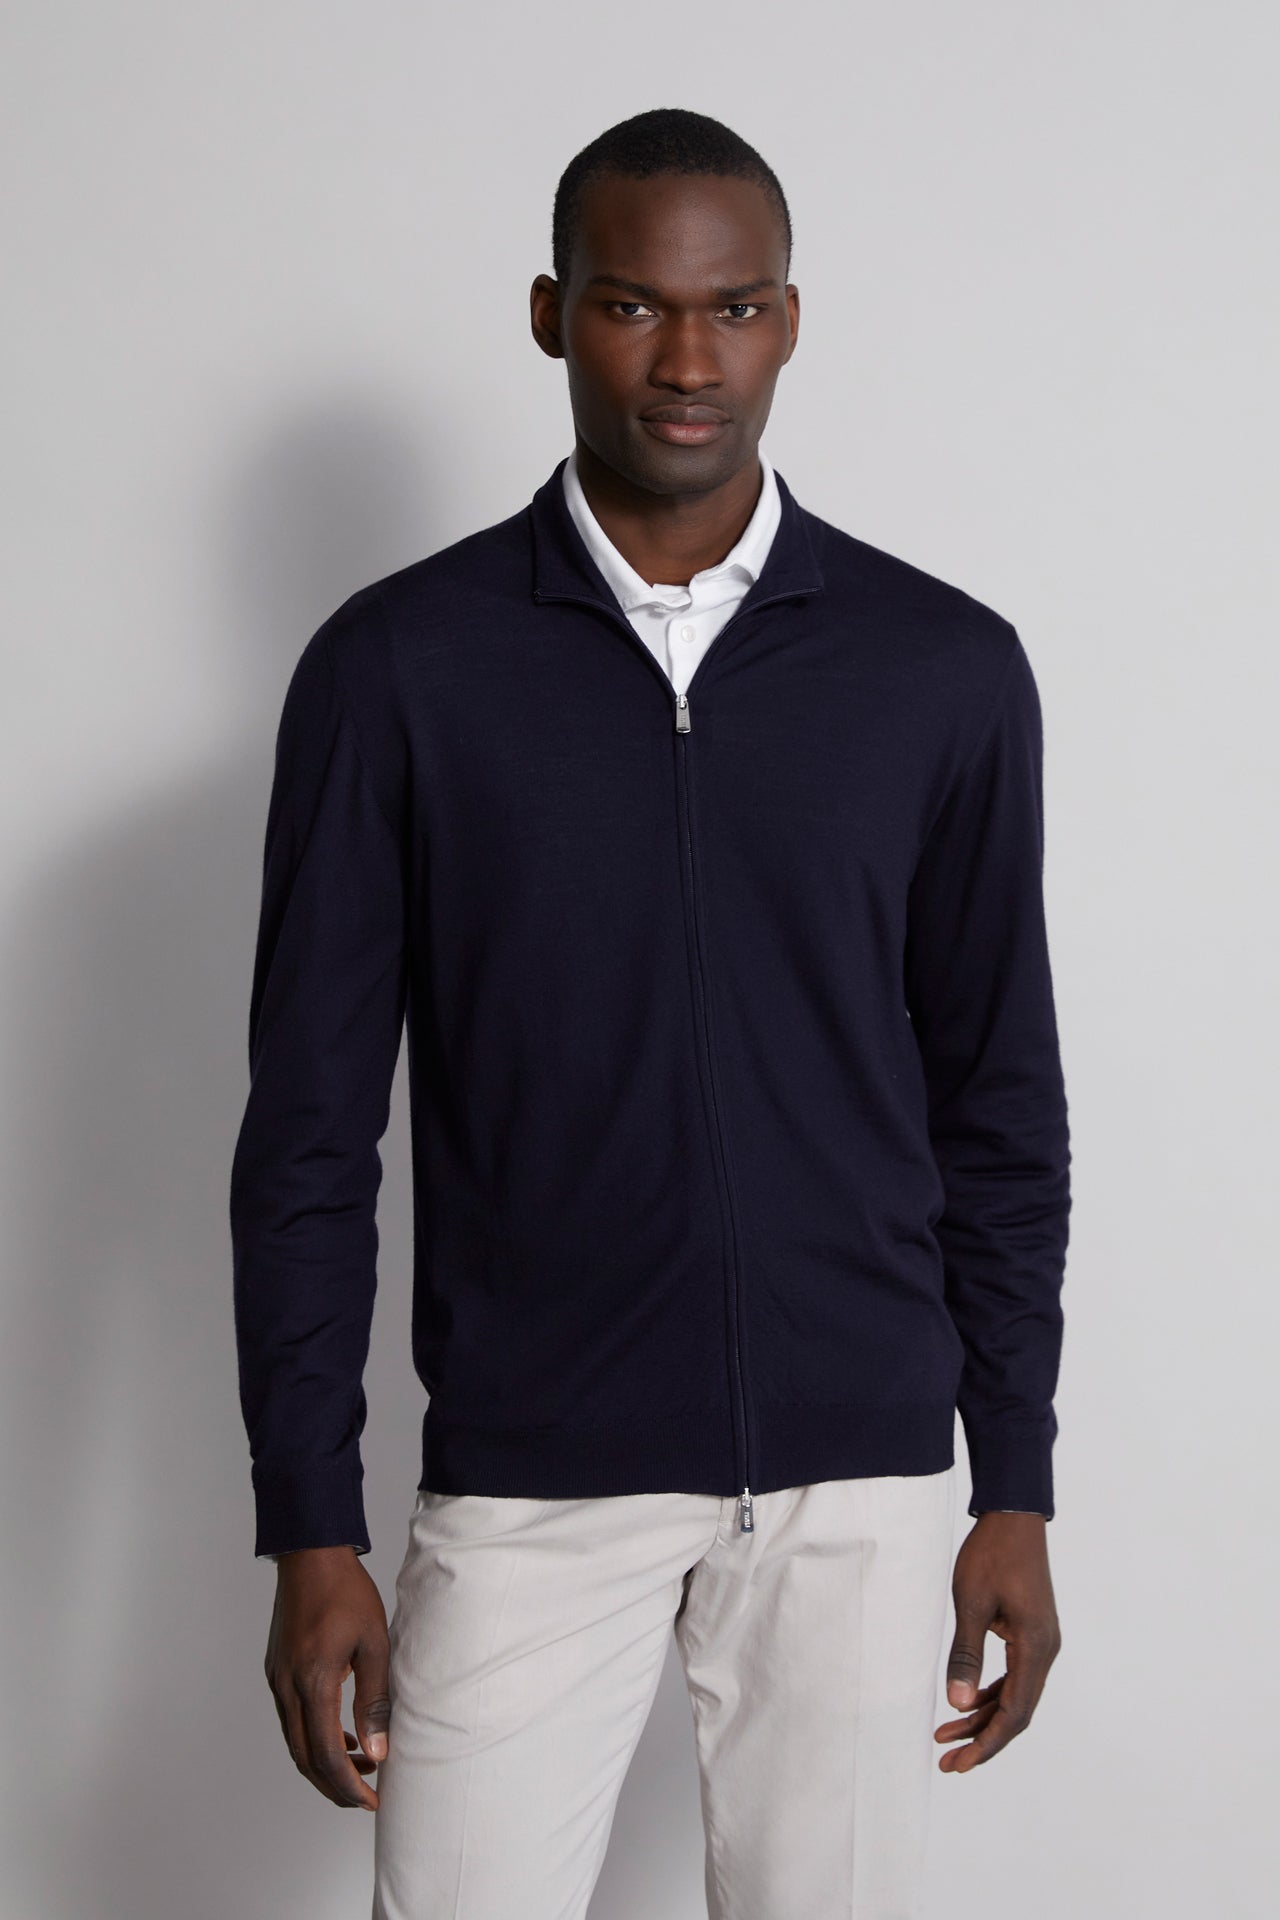 Favonio Open full-zipped Wool 140 sweater in iconic colors